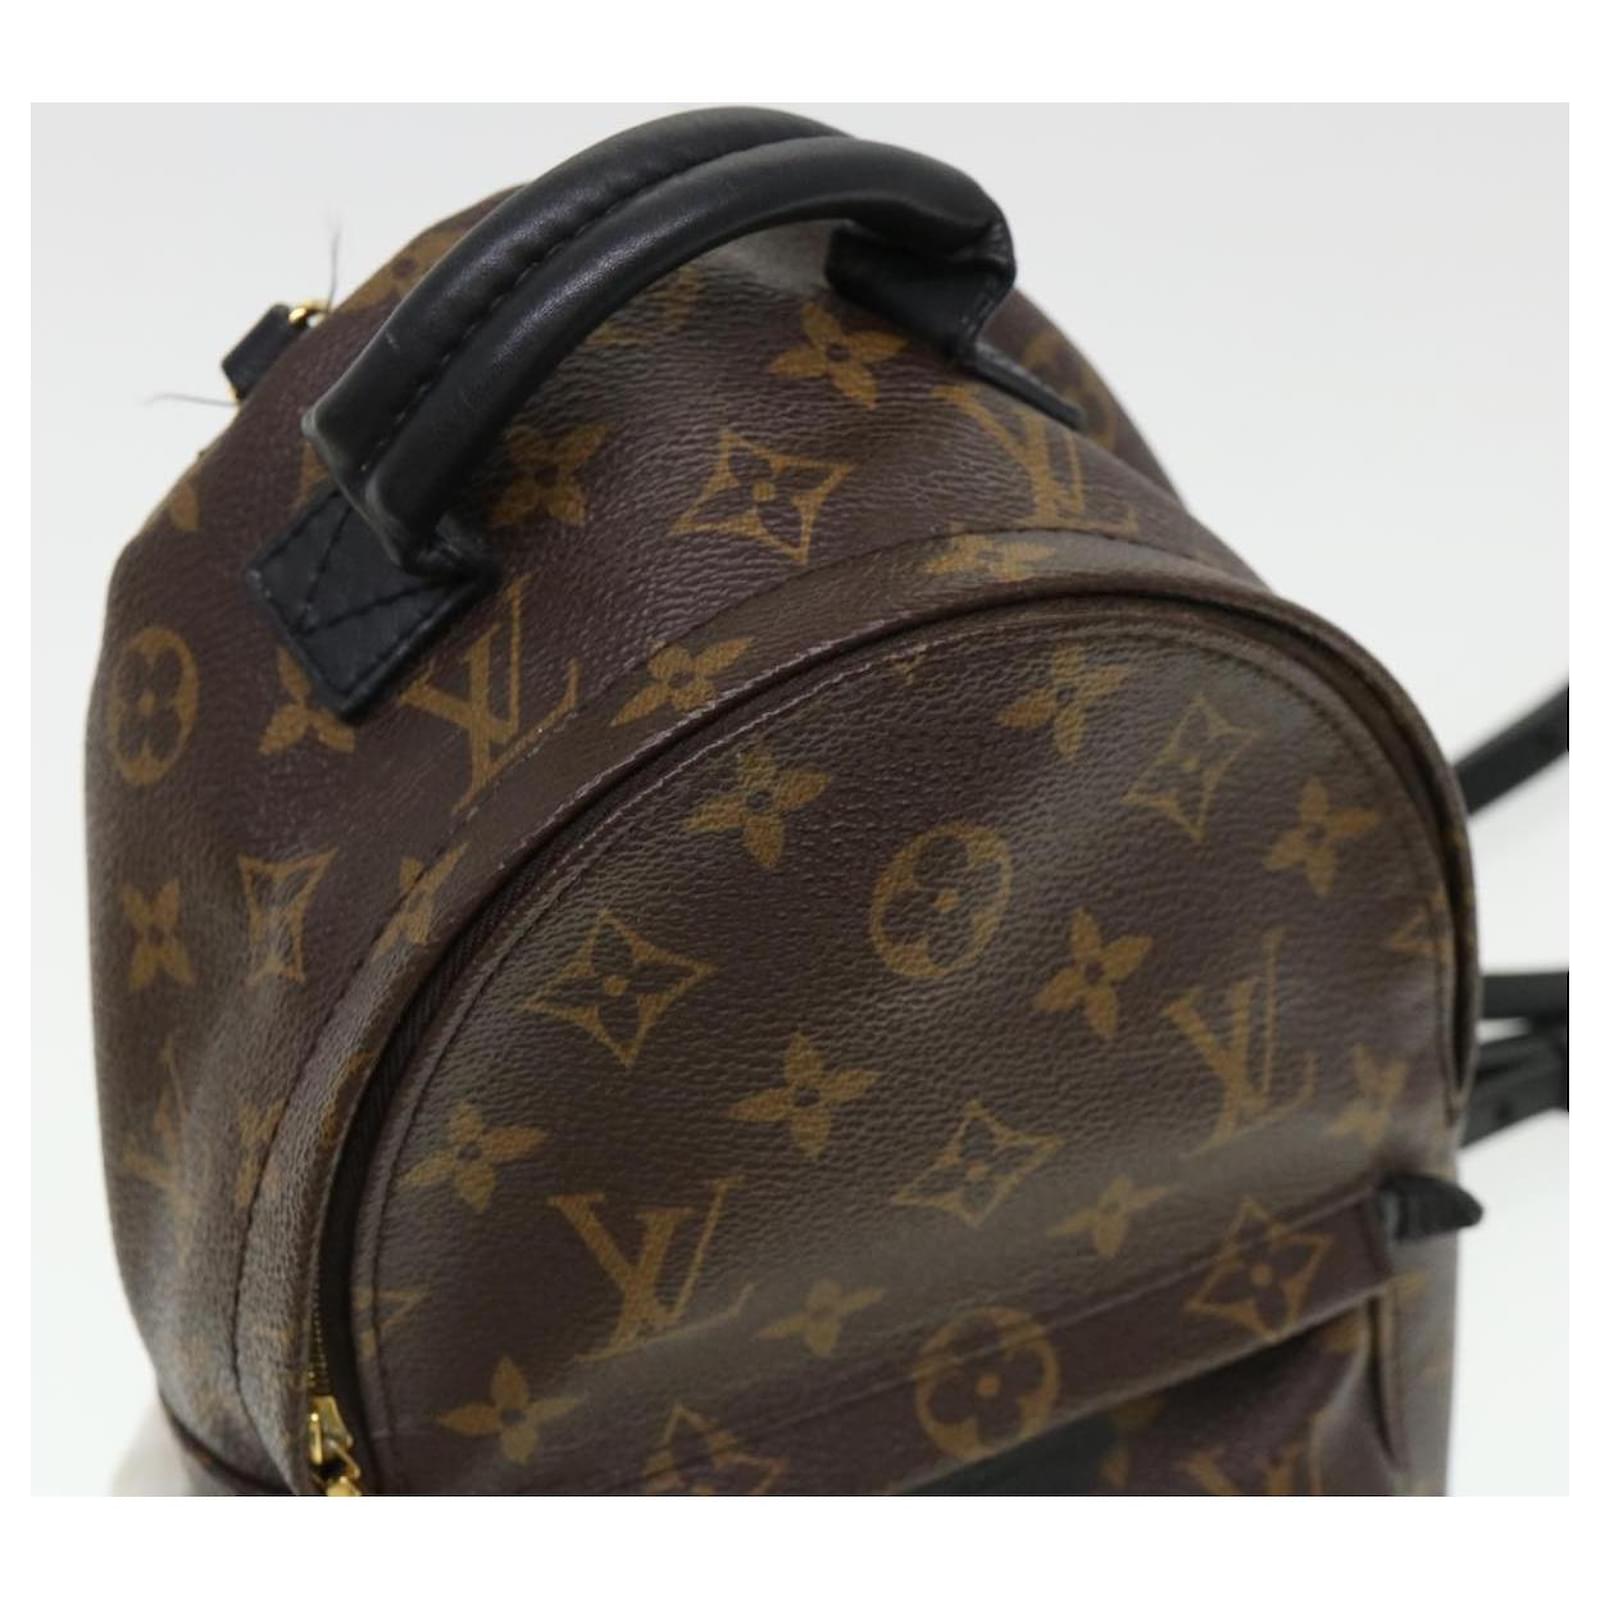 LOUIS VUITTON Monogram Palm Springs Backpack MINI M44873 from